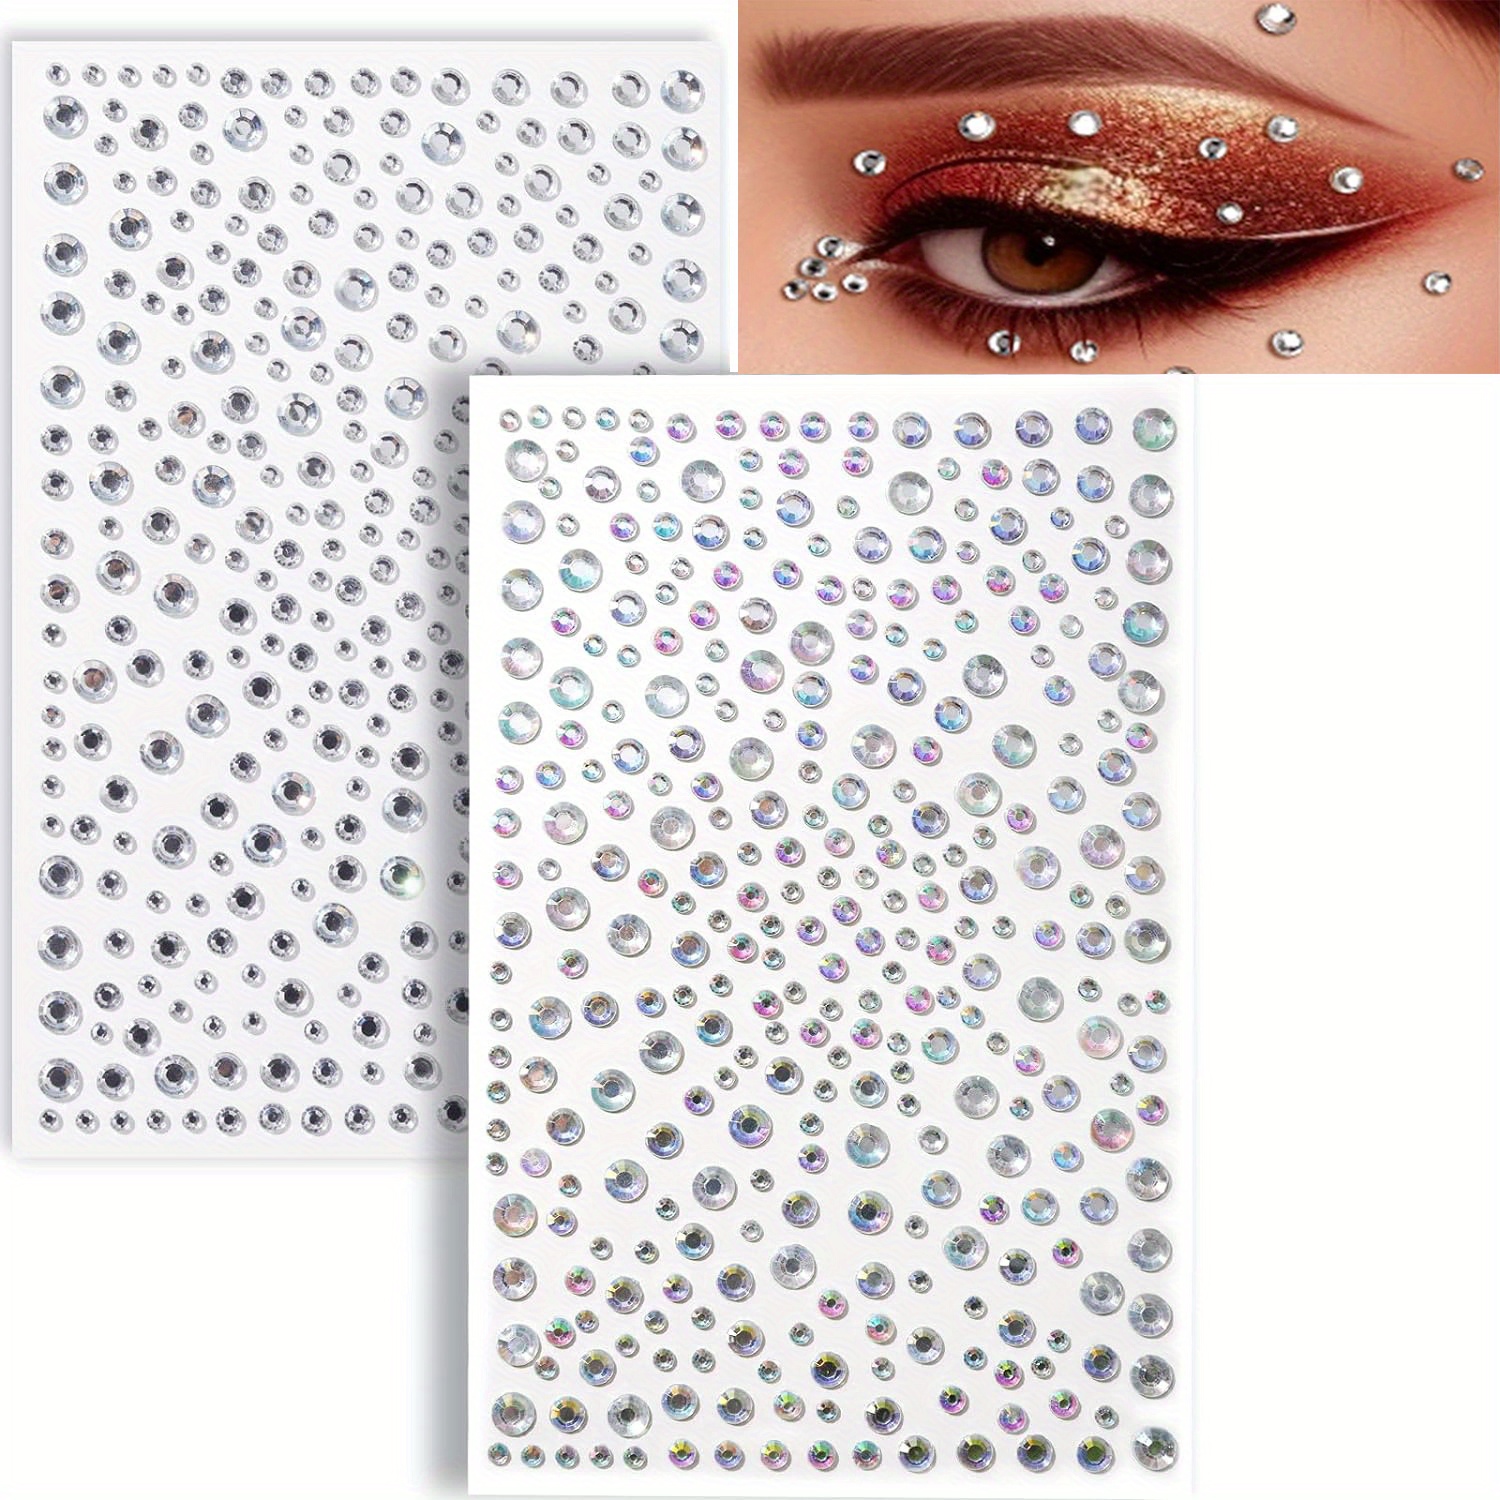 Trianu 2 Sheets Face Gems Eye Jewels with Tweezers, Acrylic Rhinestone Stickers Self Adhesive Face Crystals for Makeup, Pearl Nail Body Gems Stick on for